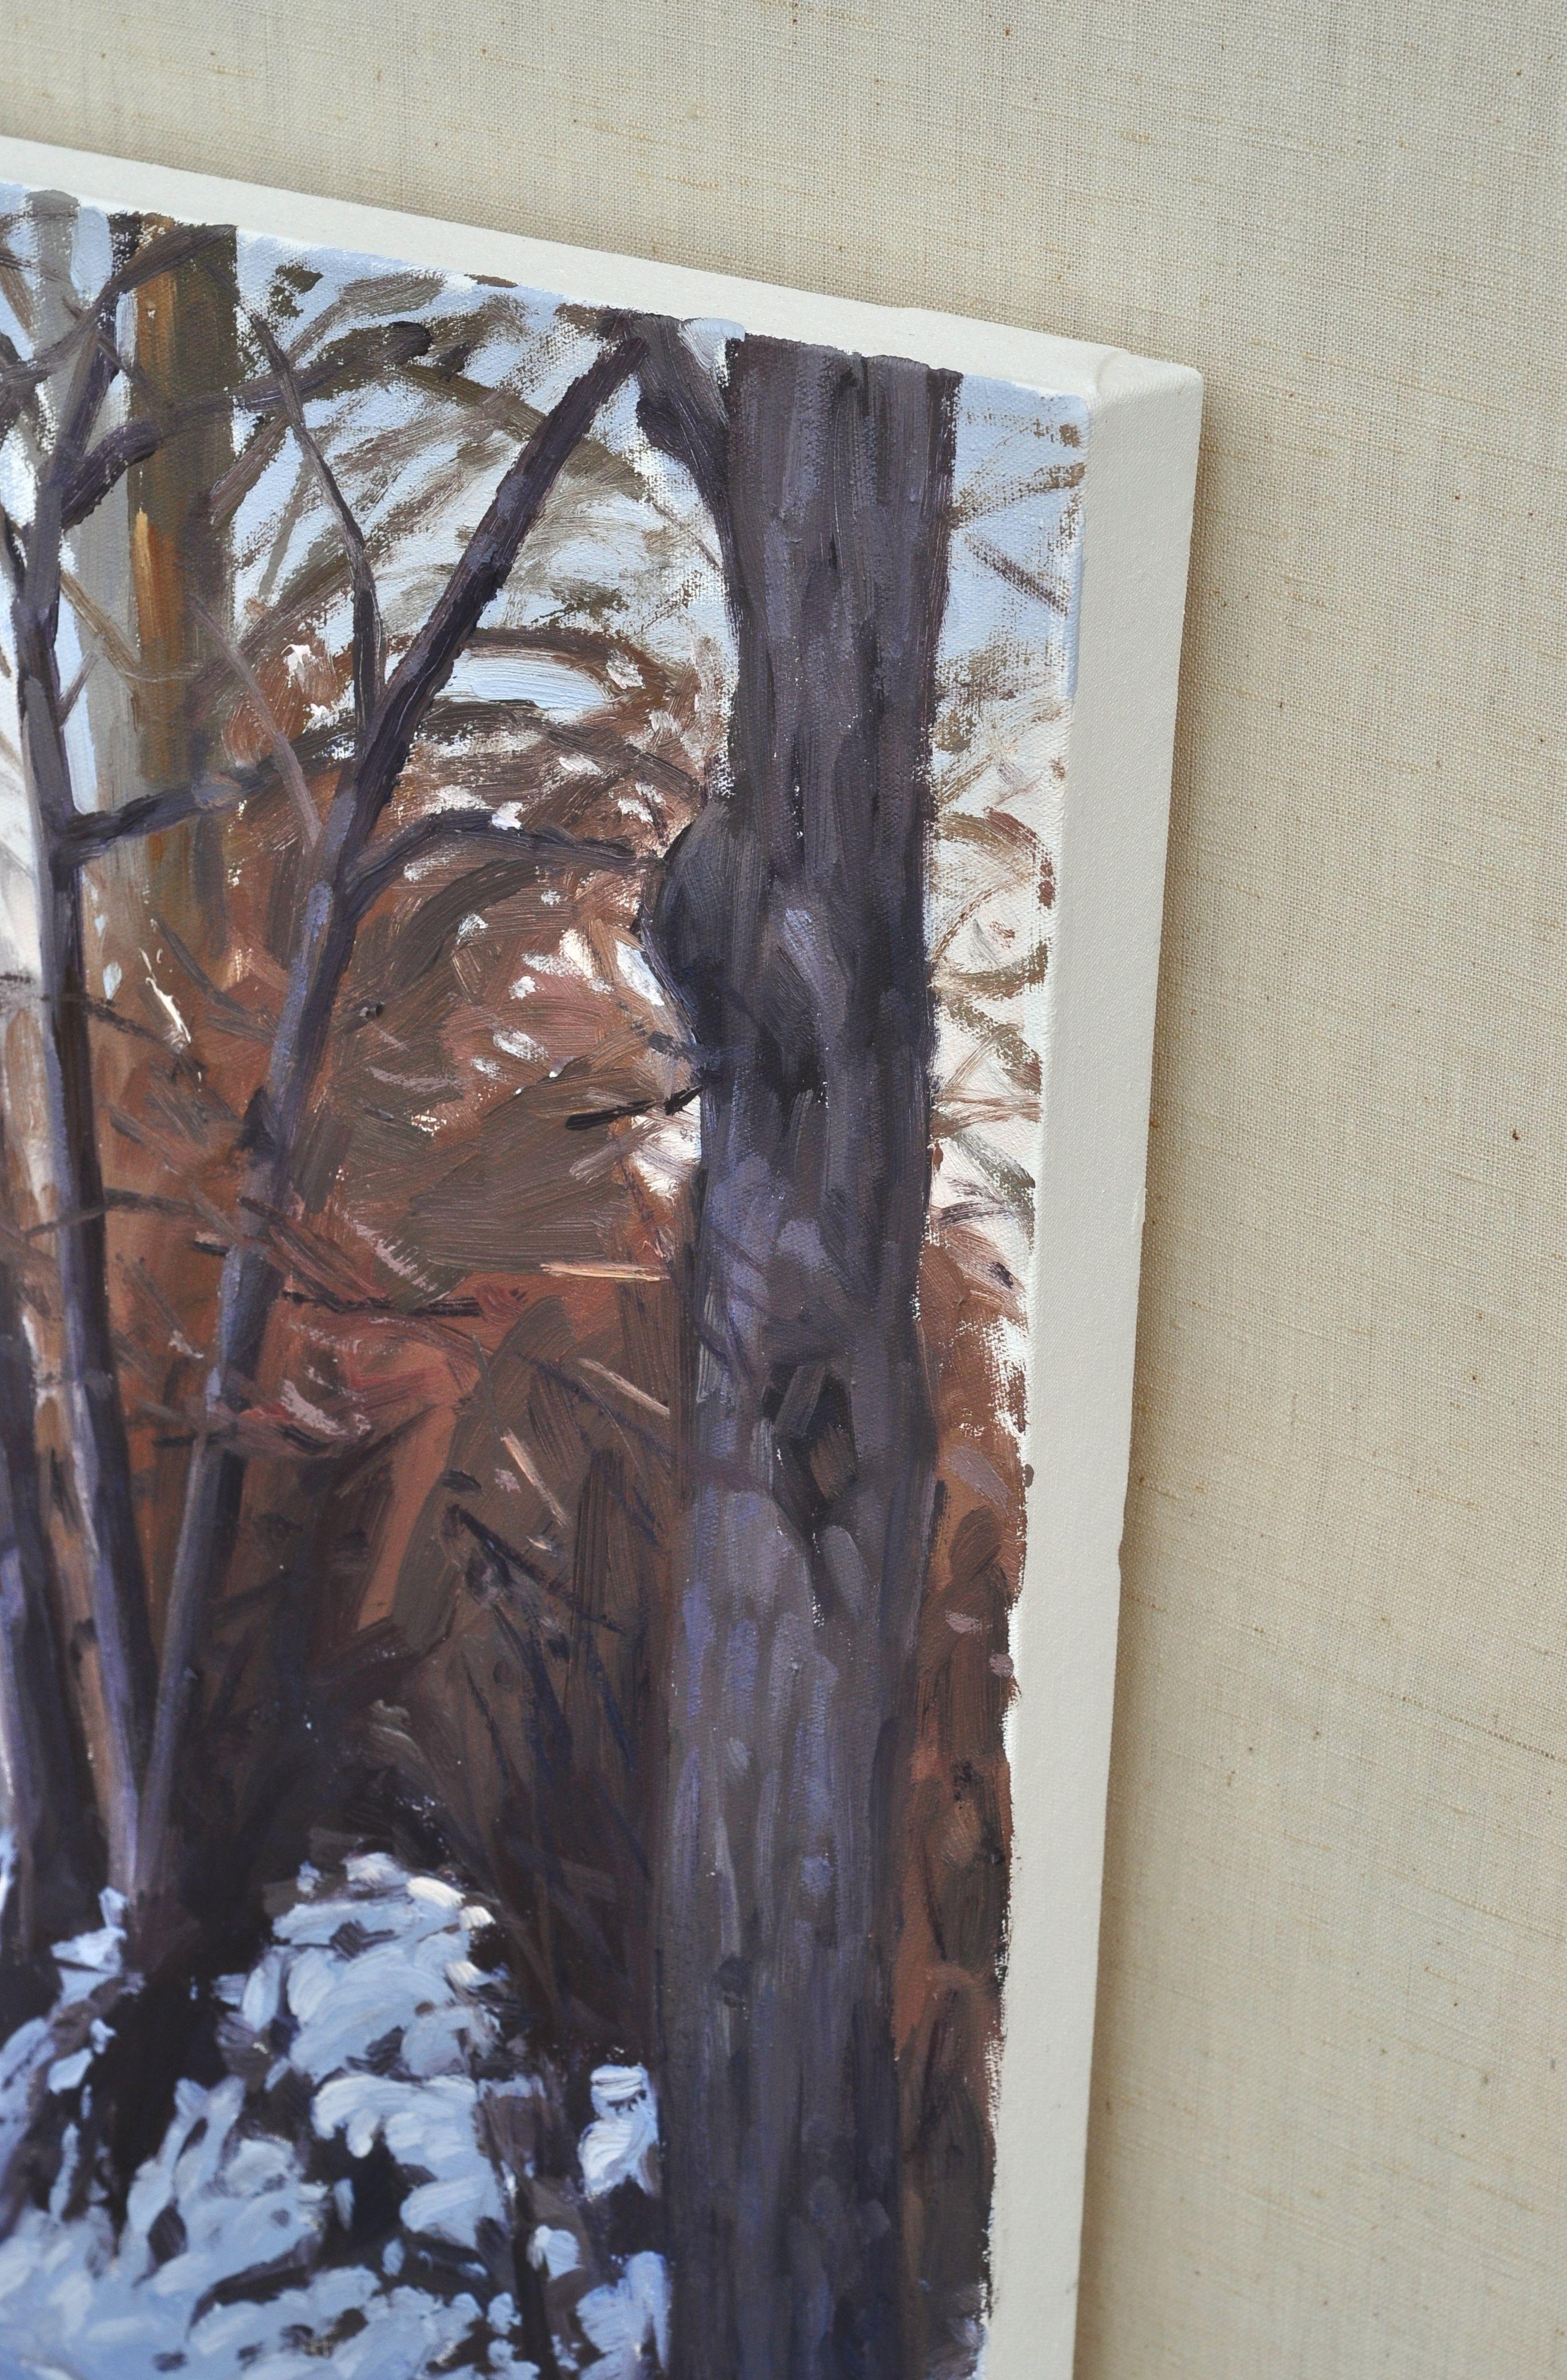 January 7, path in the snow at Saint Vincent, Painting, Oil on Canvas 4